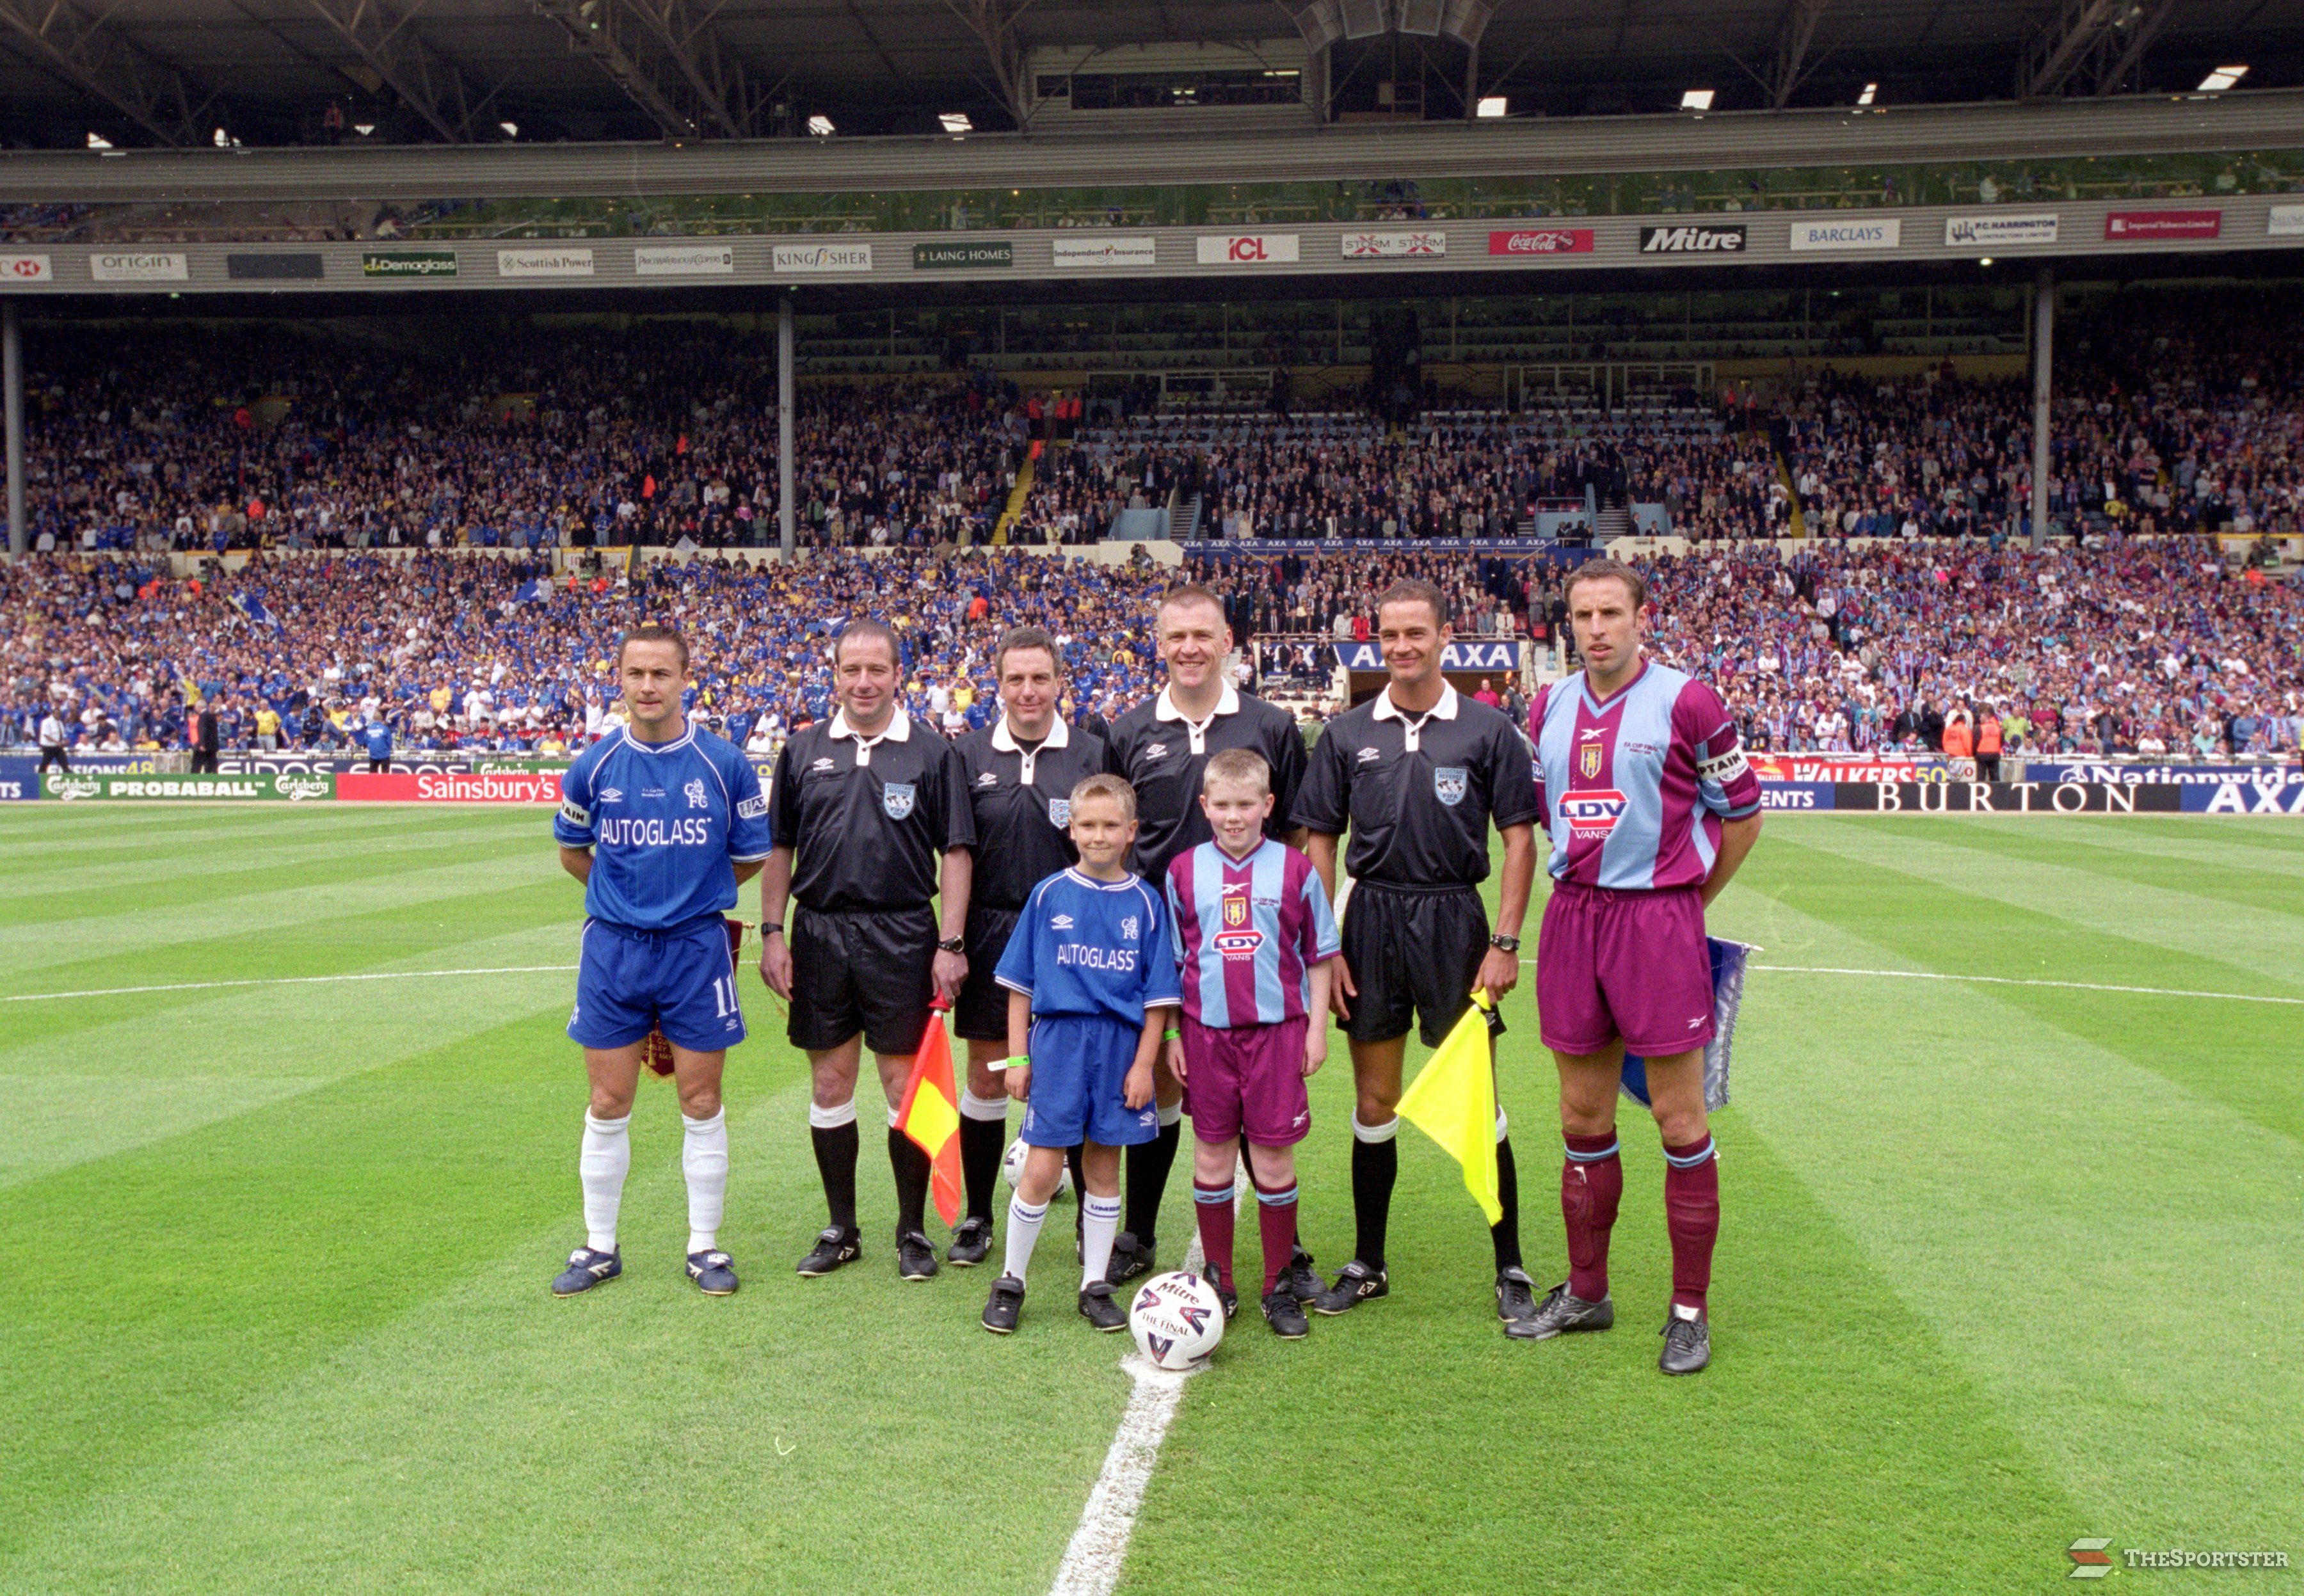 20 May 2000: Chelsea Captain Dennis Wise (left) and Aston Villa captain Gareth Southgate (right) line up with Officials (centre) before the AXA FA Cup Final 2000 Match at Wembley Stadium, London, England. Chelsea won 1-0. \ Mandatory Credit: Shaun Botterill /Allsport